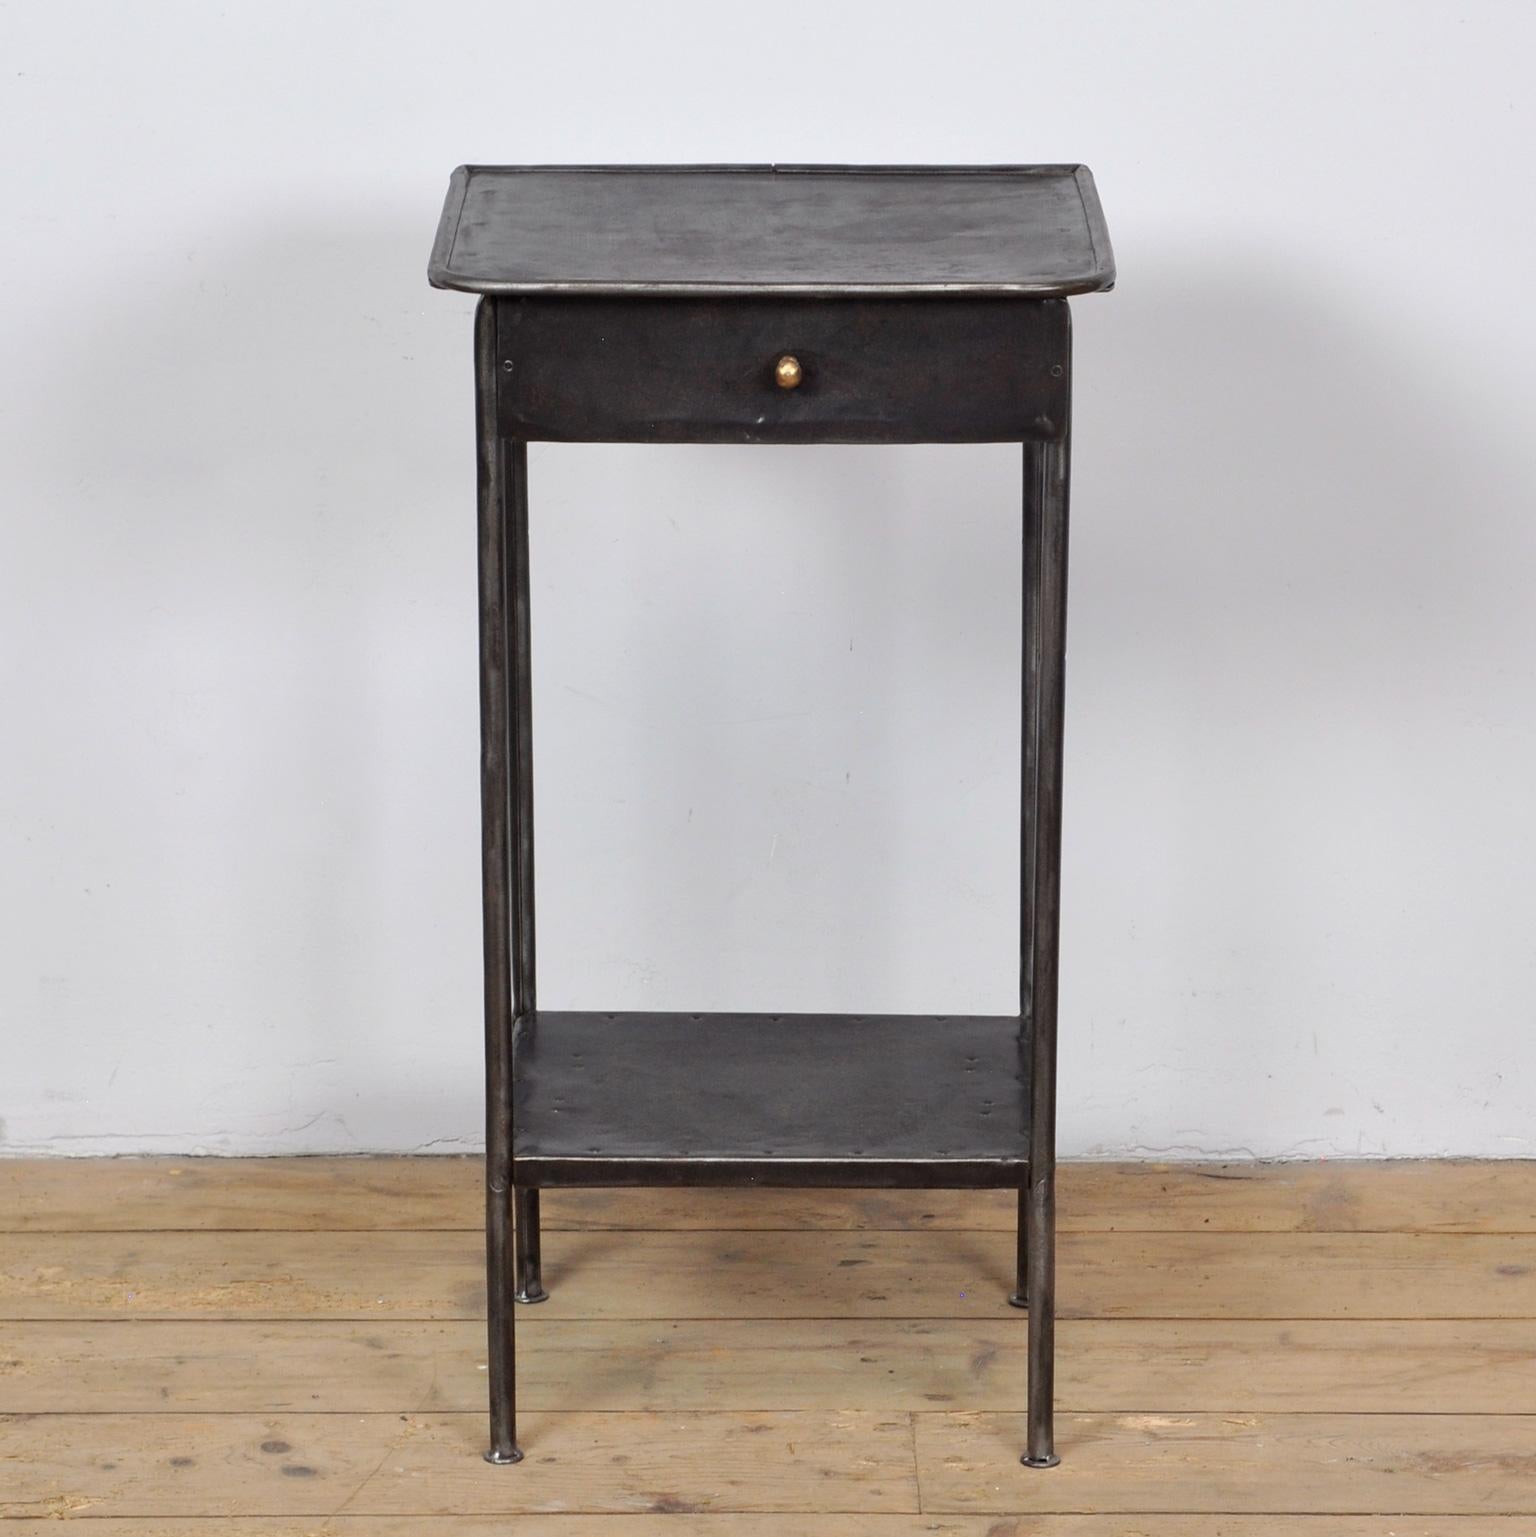 Iron hospital bedside table. The item has been stripped from its paint. Treated against rust. Circa 1920. 